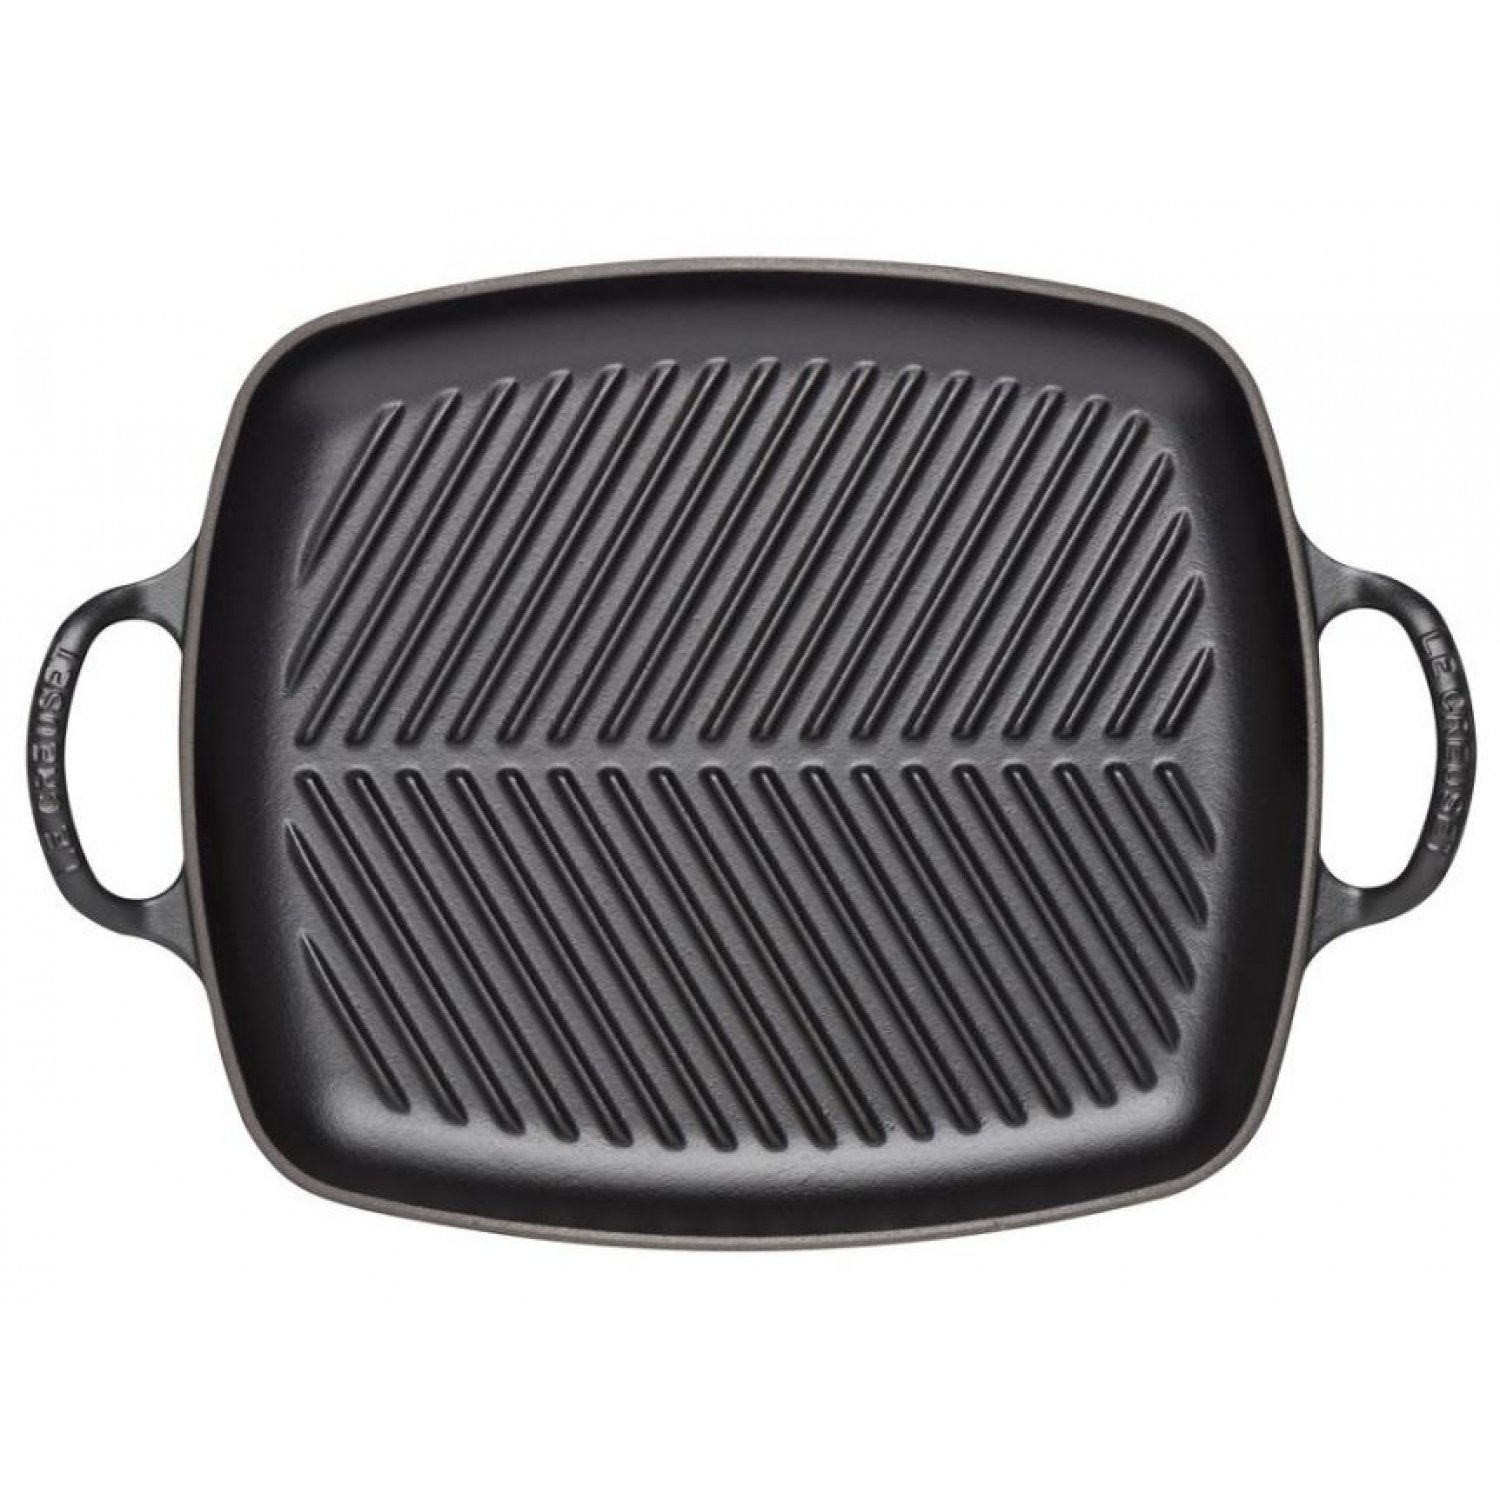 Le Creuset Rectangular Cast Iron Grill Pan Griddle 30Made in